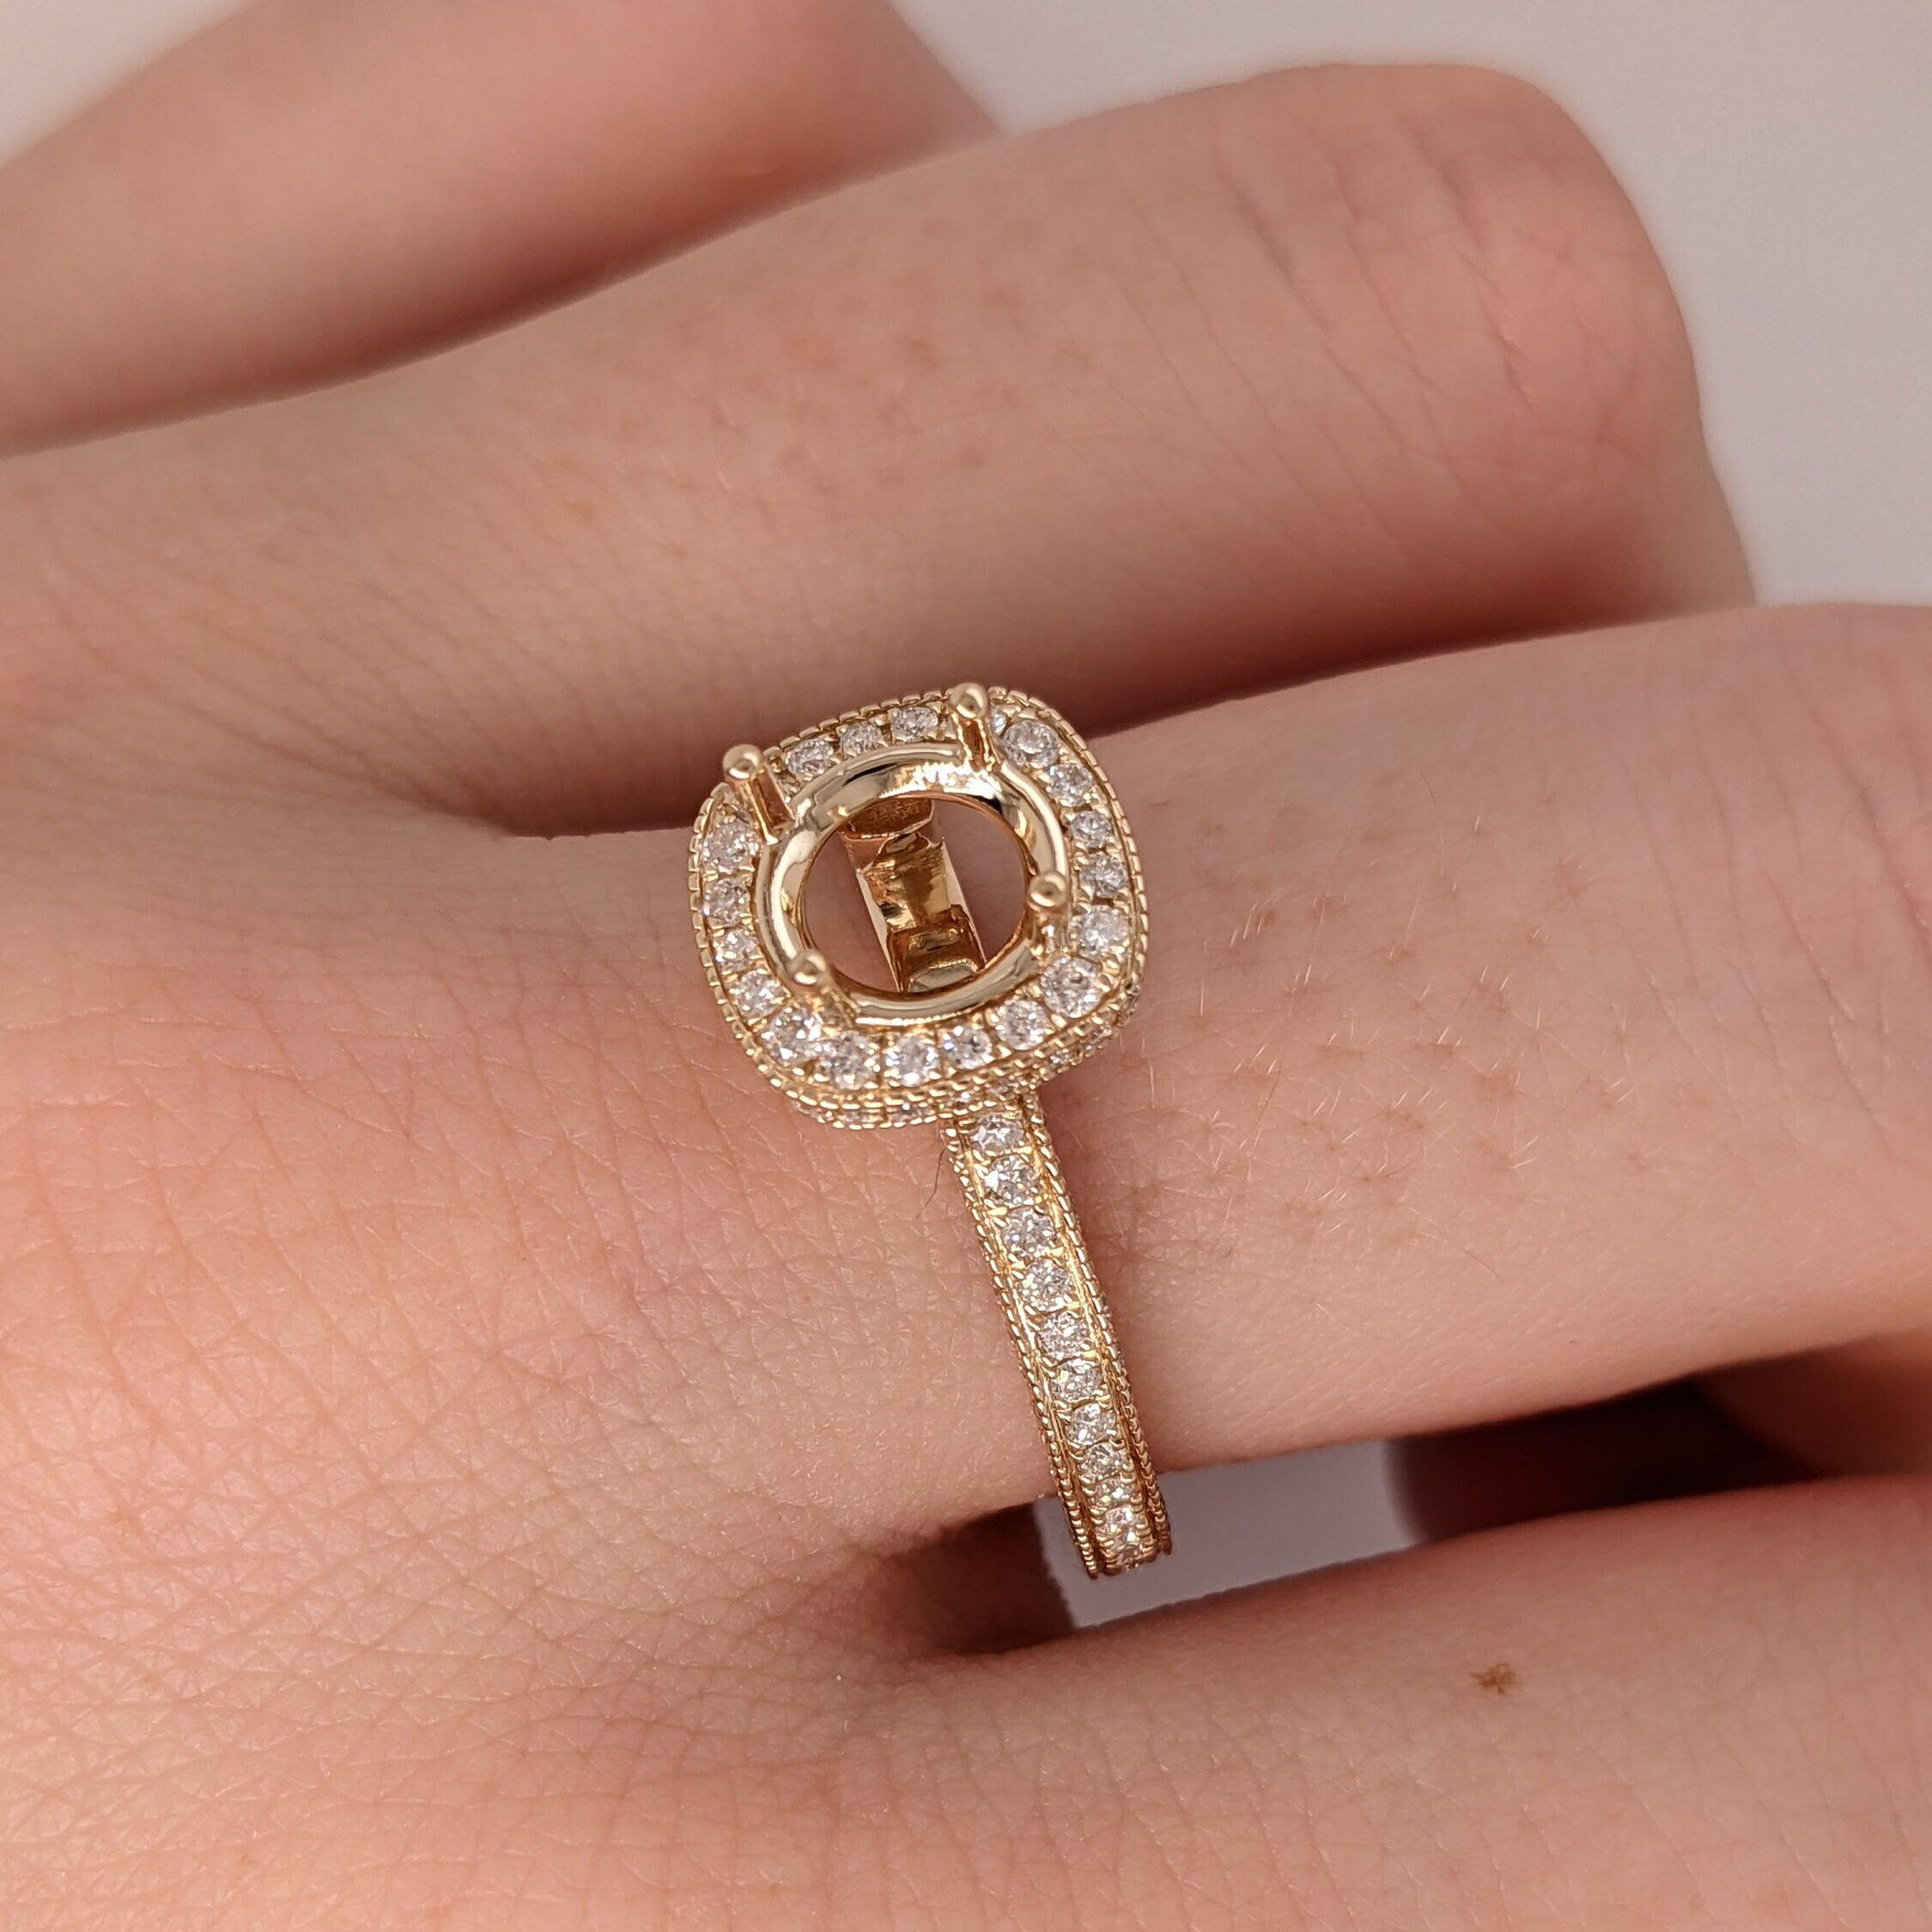 Stunning Vintage Inspired Ring Semi Mount with Diamond Halo and Pave Diamond Shank | Round 6.7mm | Brilliant Cut | Custom Sizes!